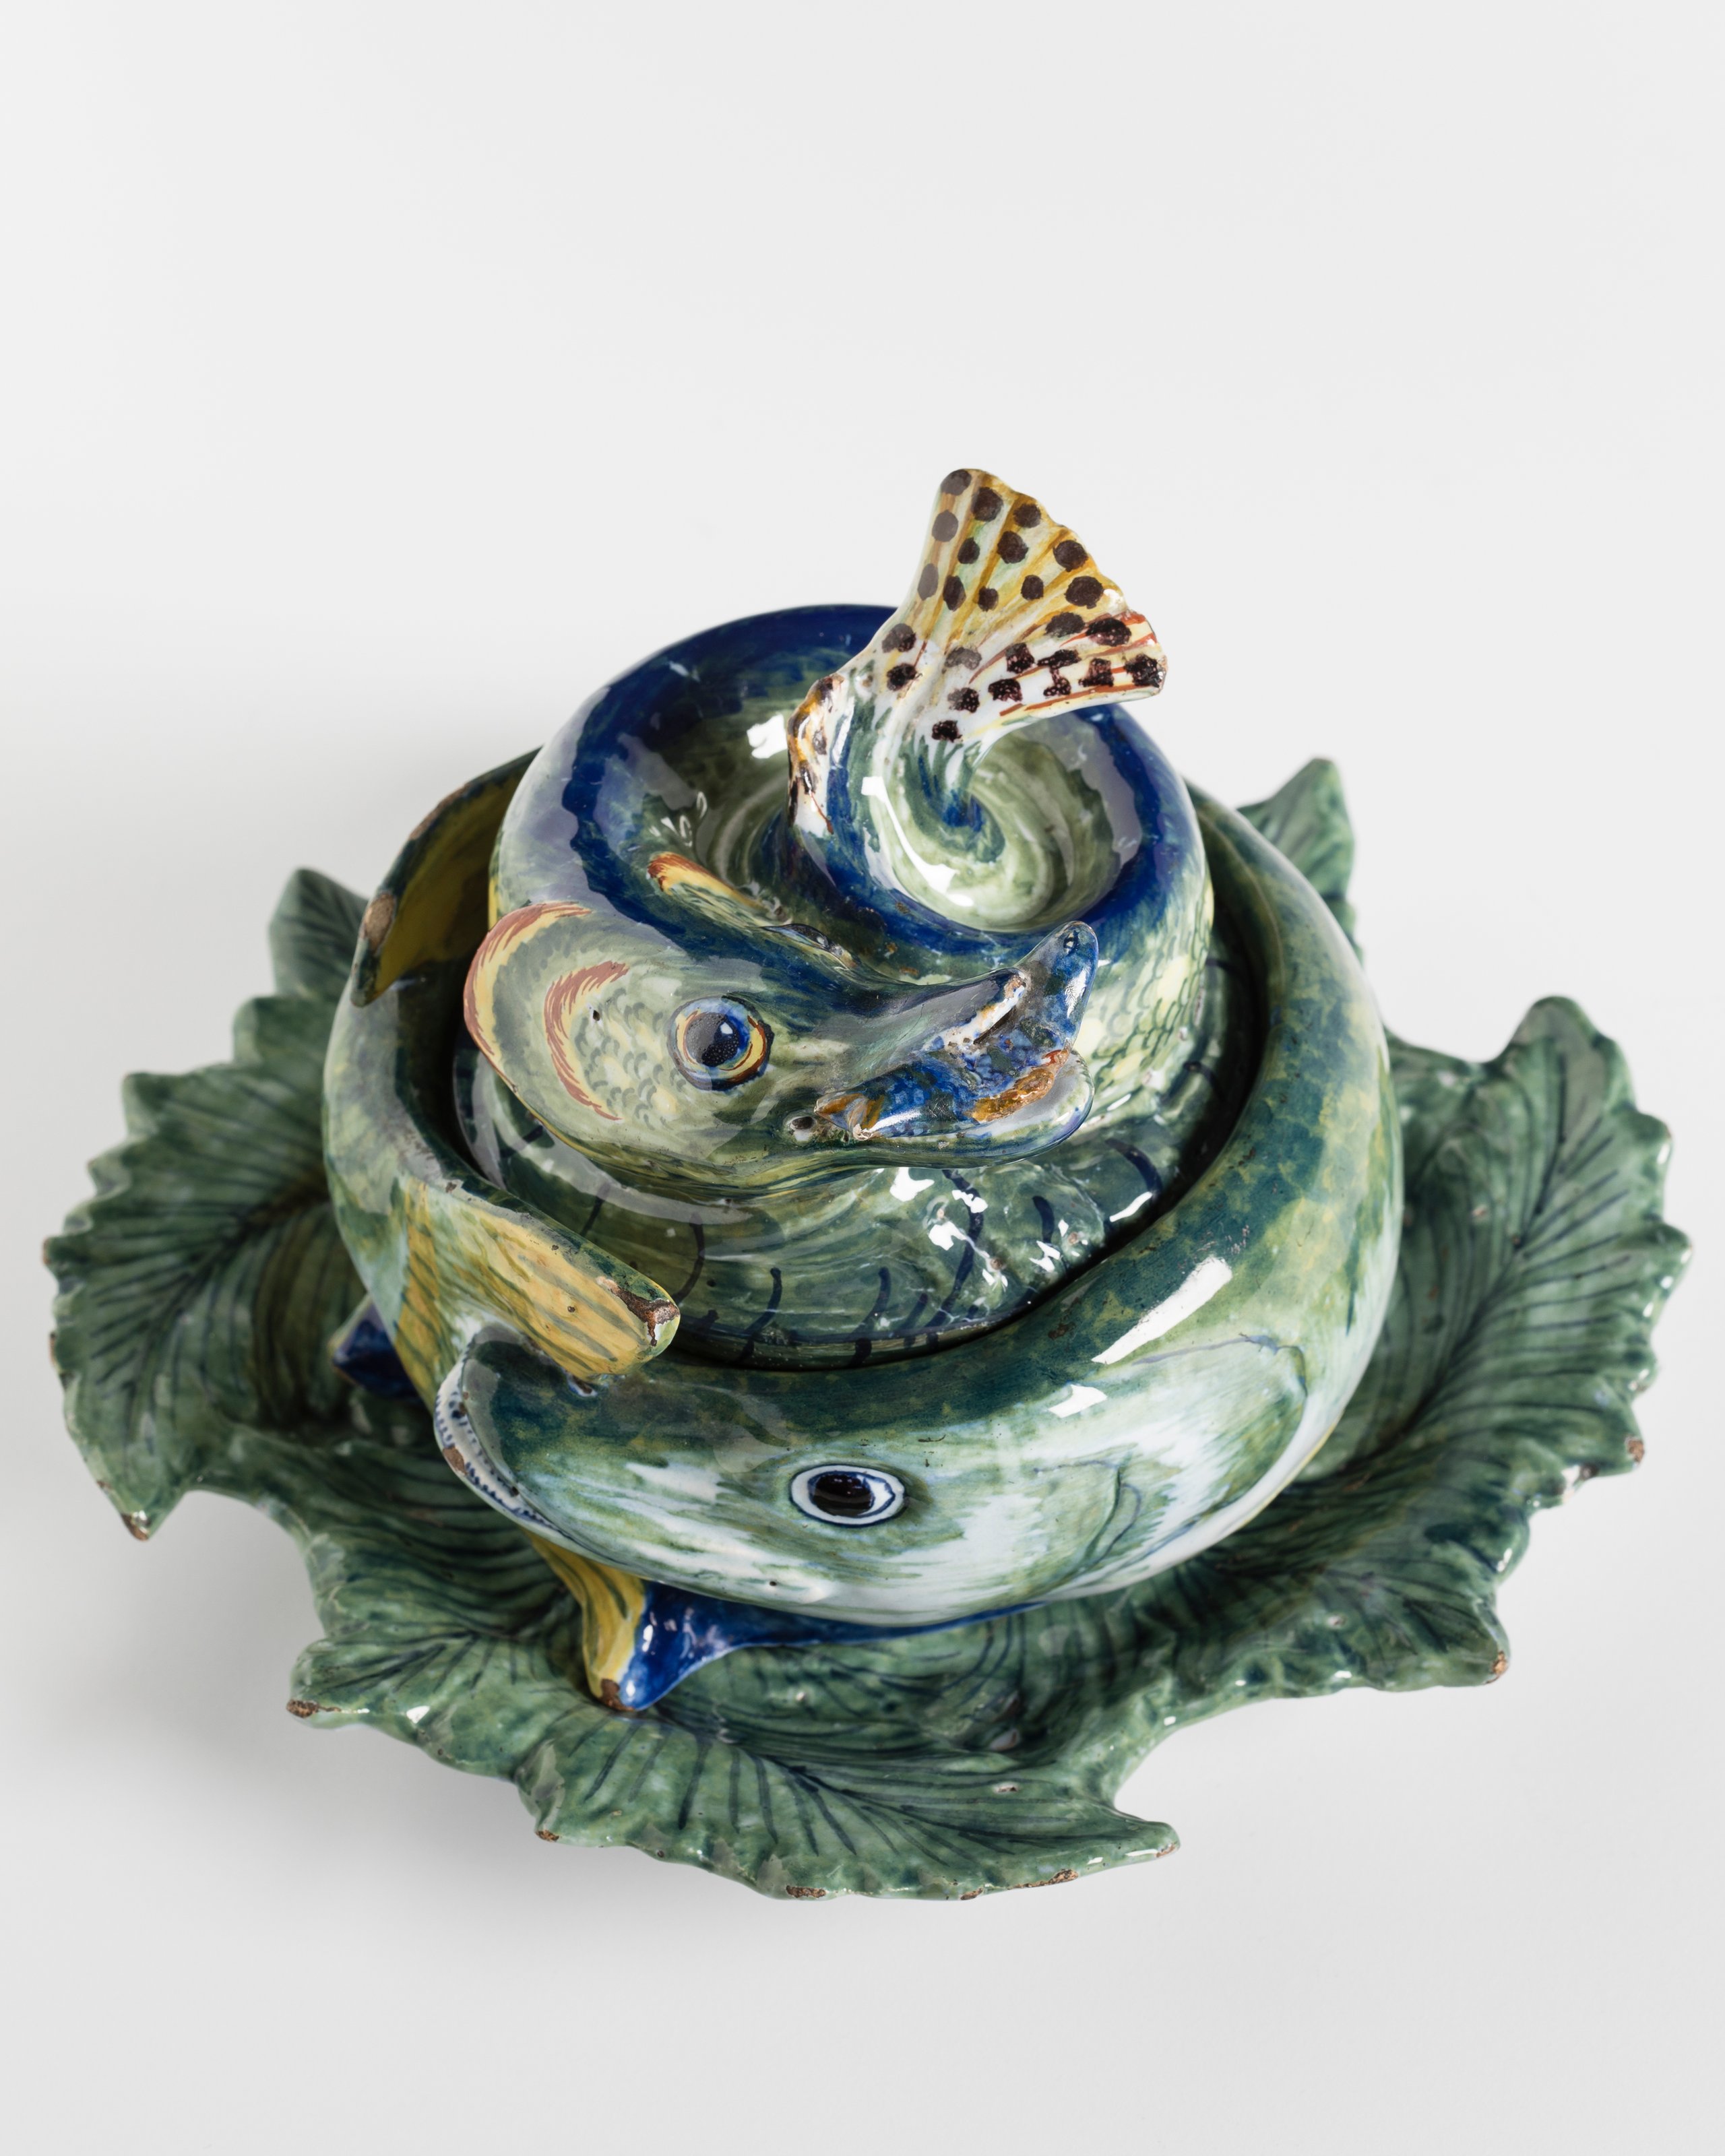 Rococo style tureen from Delft